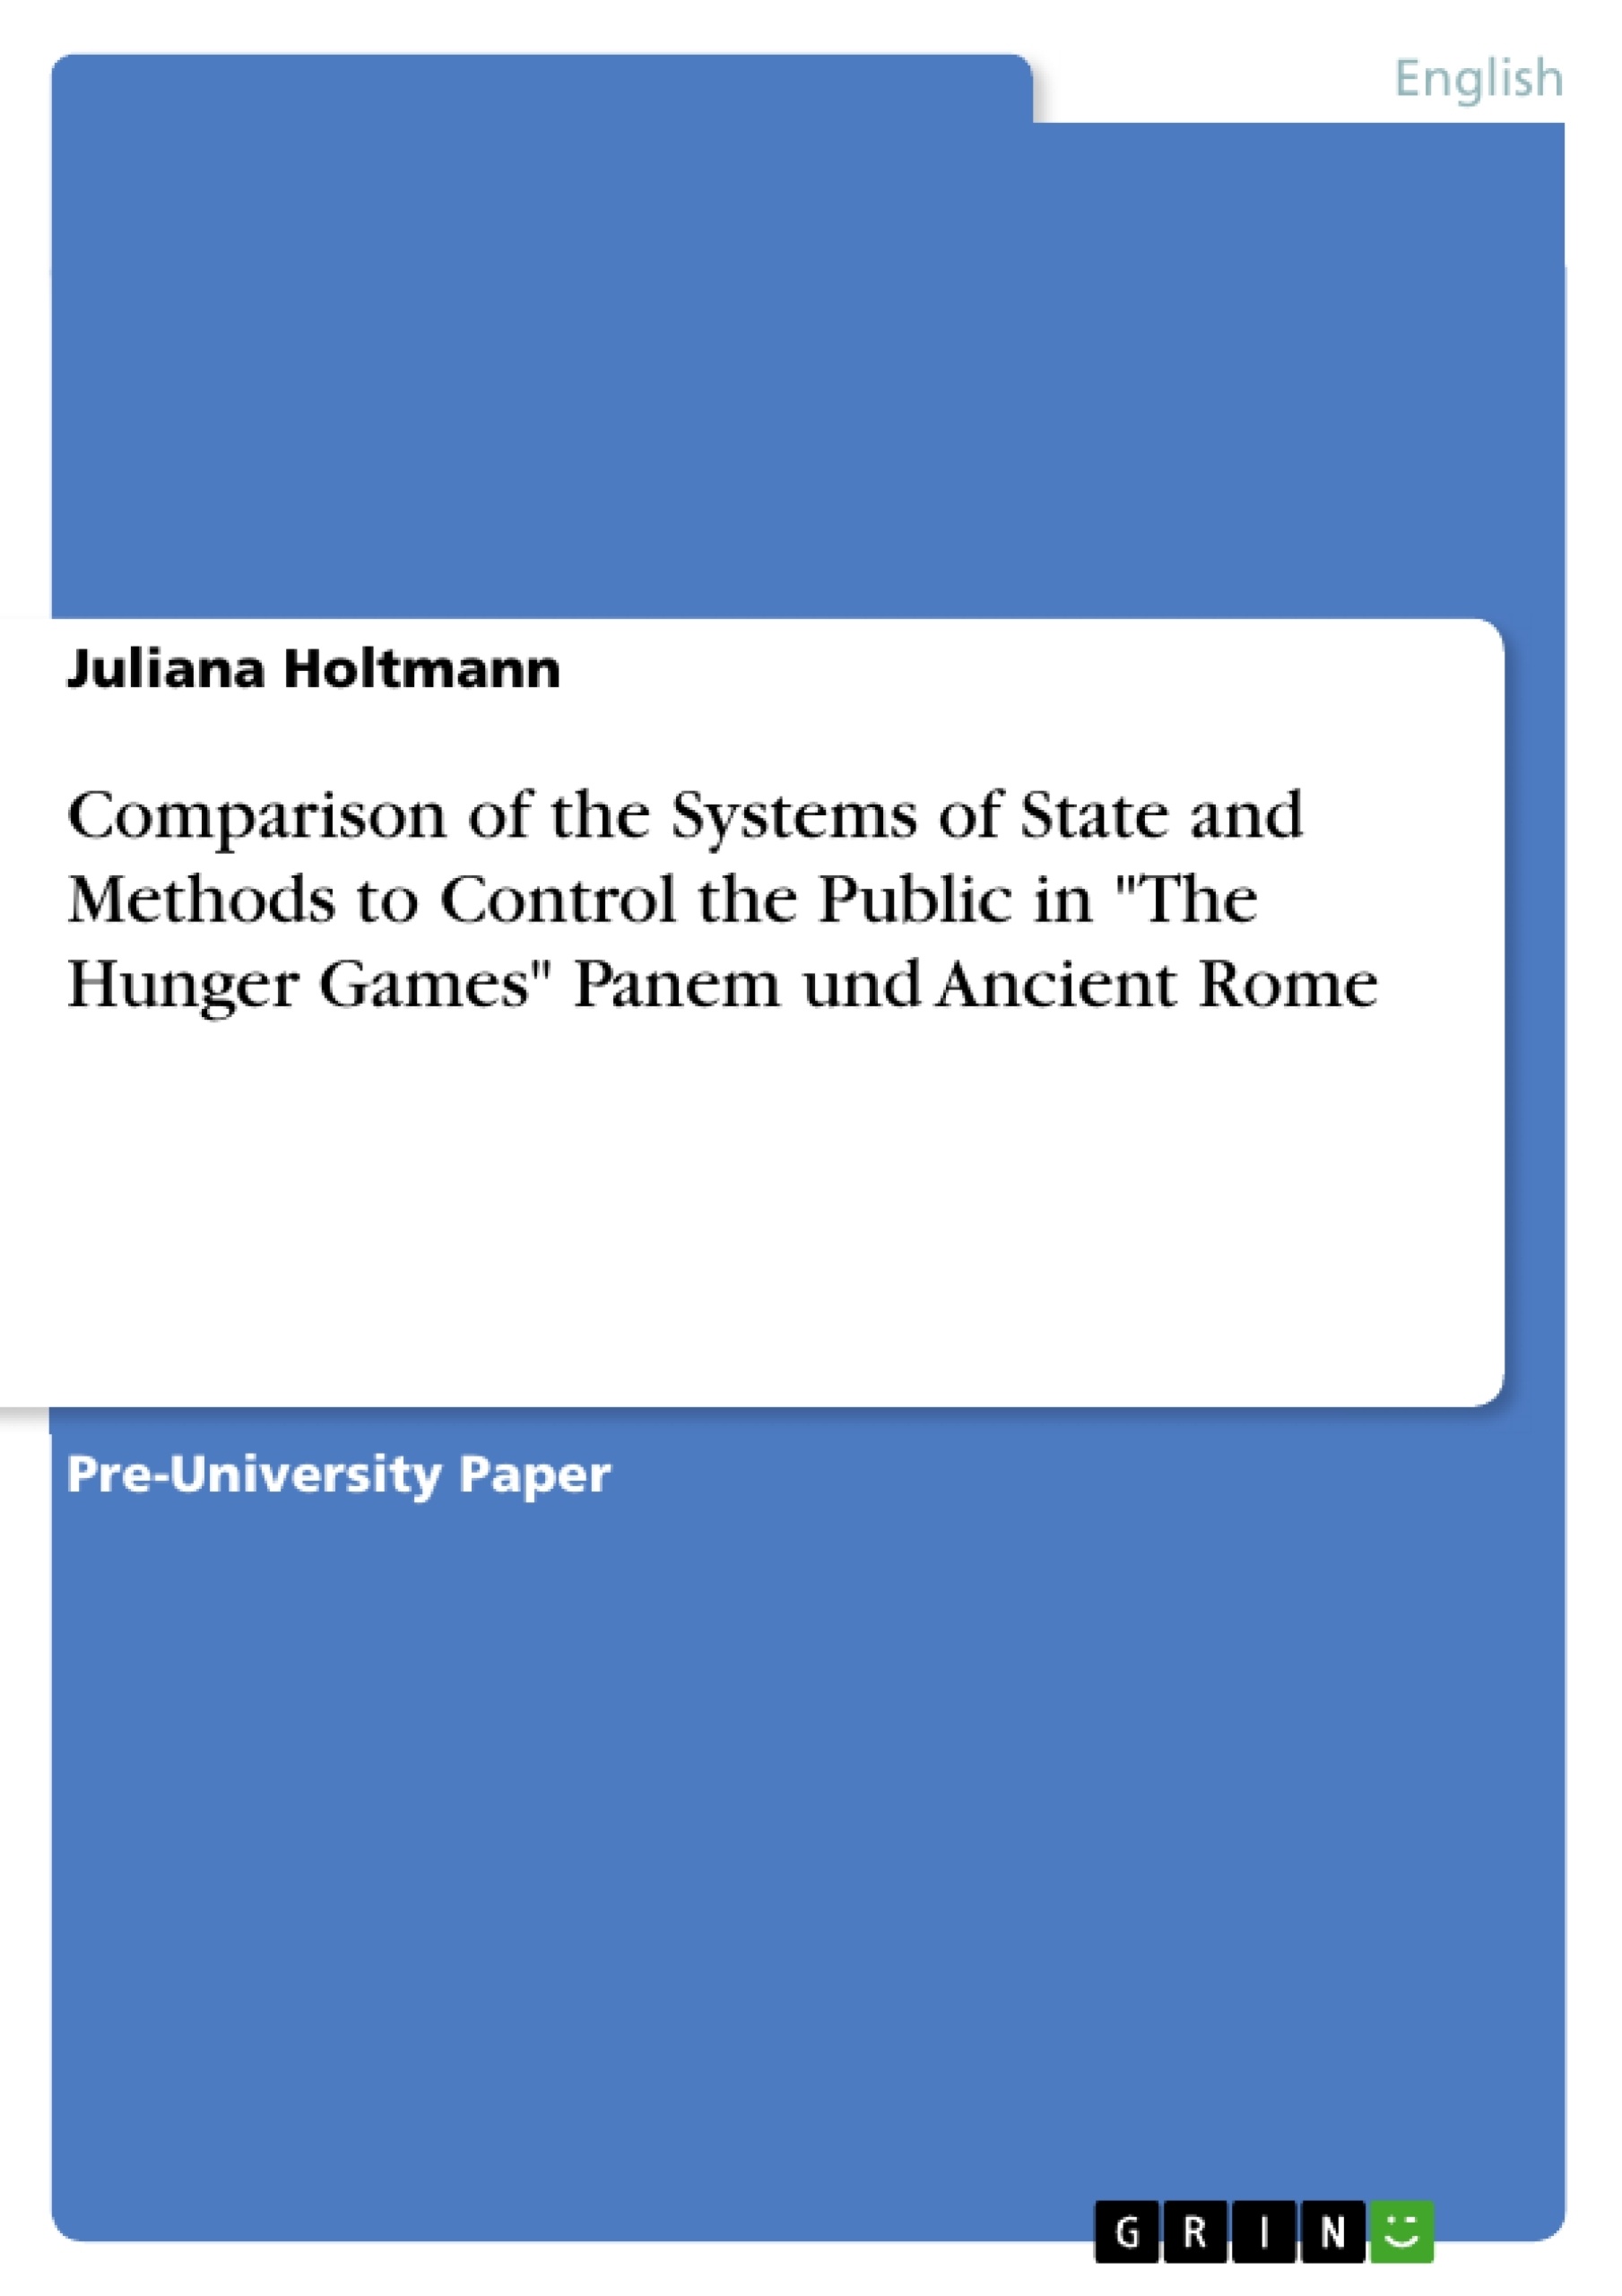 Title: Comparison of the systems of state and methods to control the public in panem und ancient rome